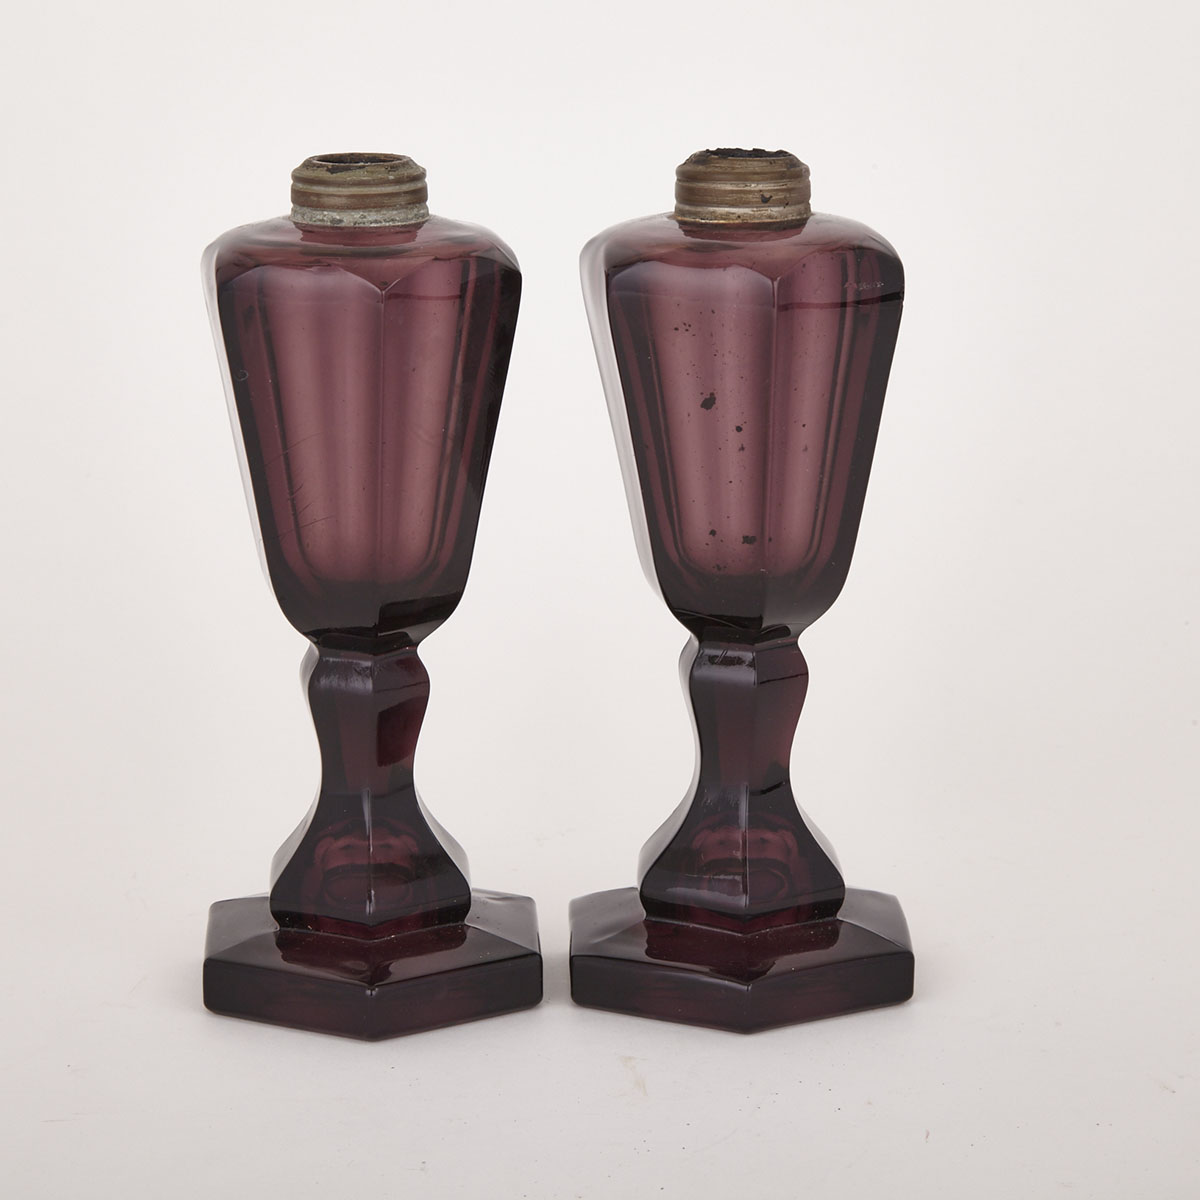 Pair of American Amethyst Glass Whale Oil Lamps, c.1840